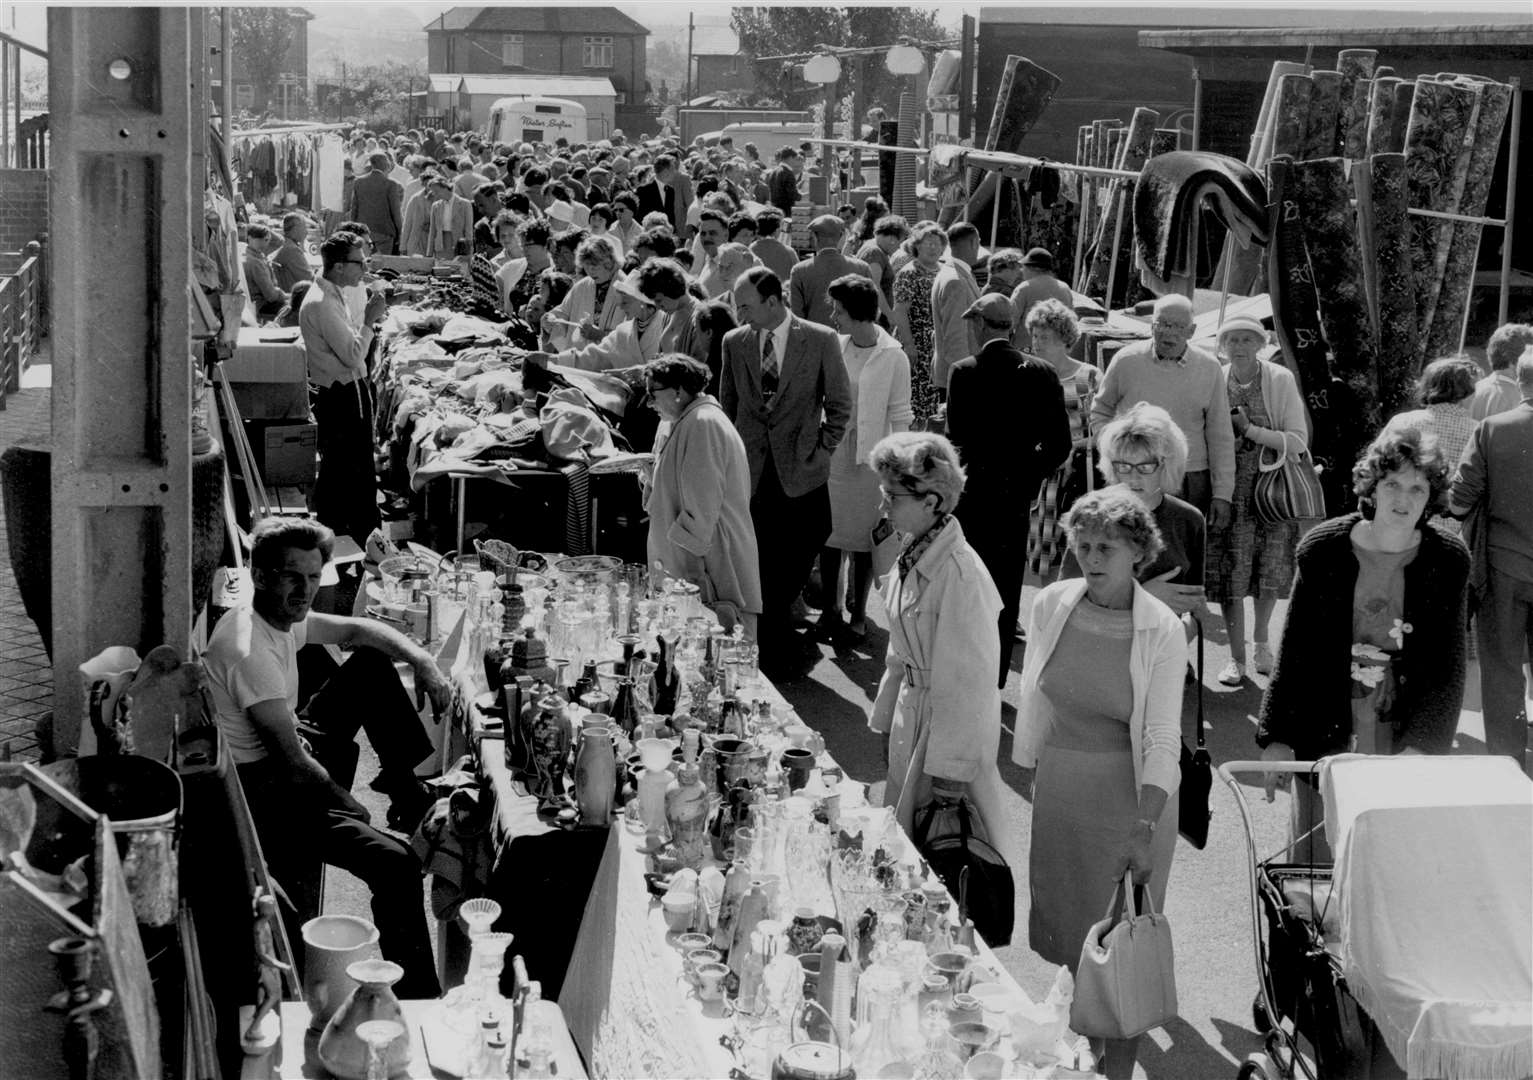 Canterbury's new general market, the first since the war, opened at the cattle market. Thousands of people turned up to browse through the 350 stalls